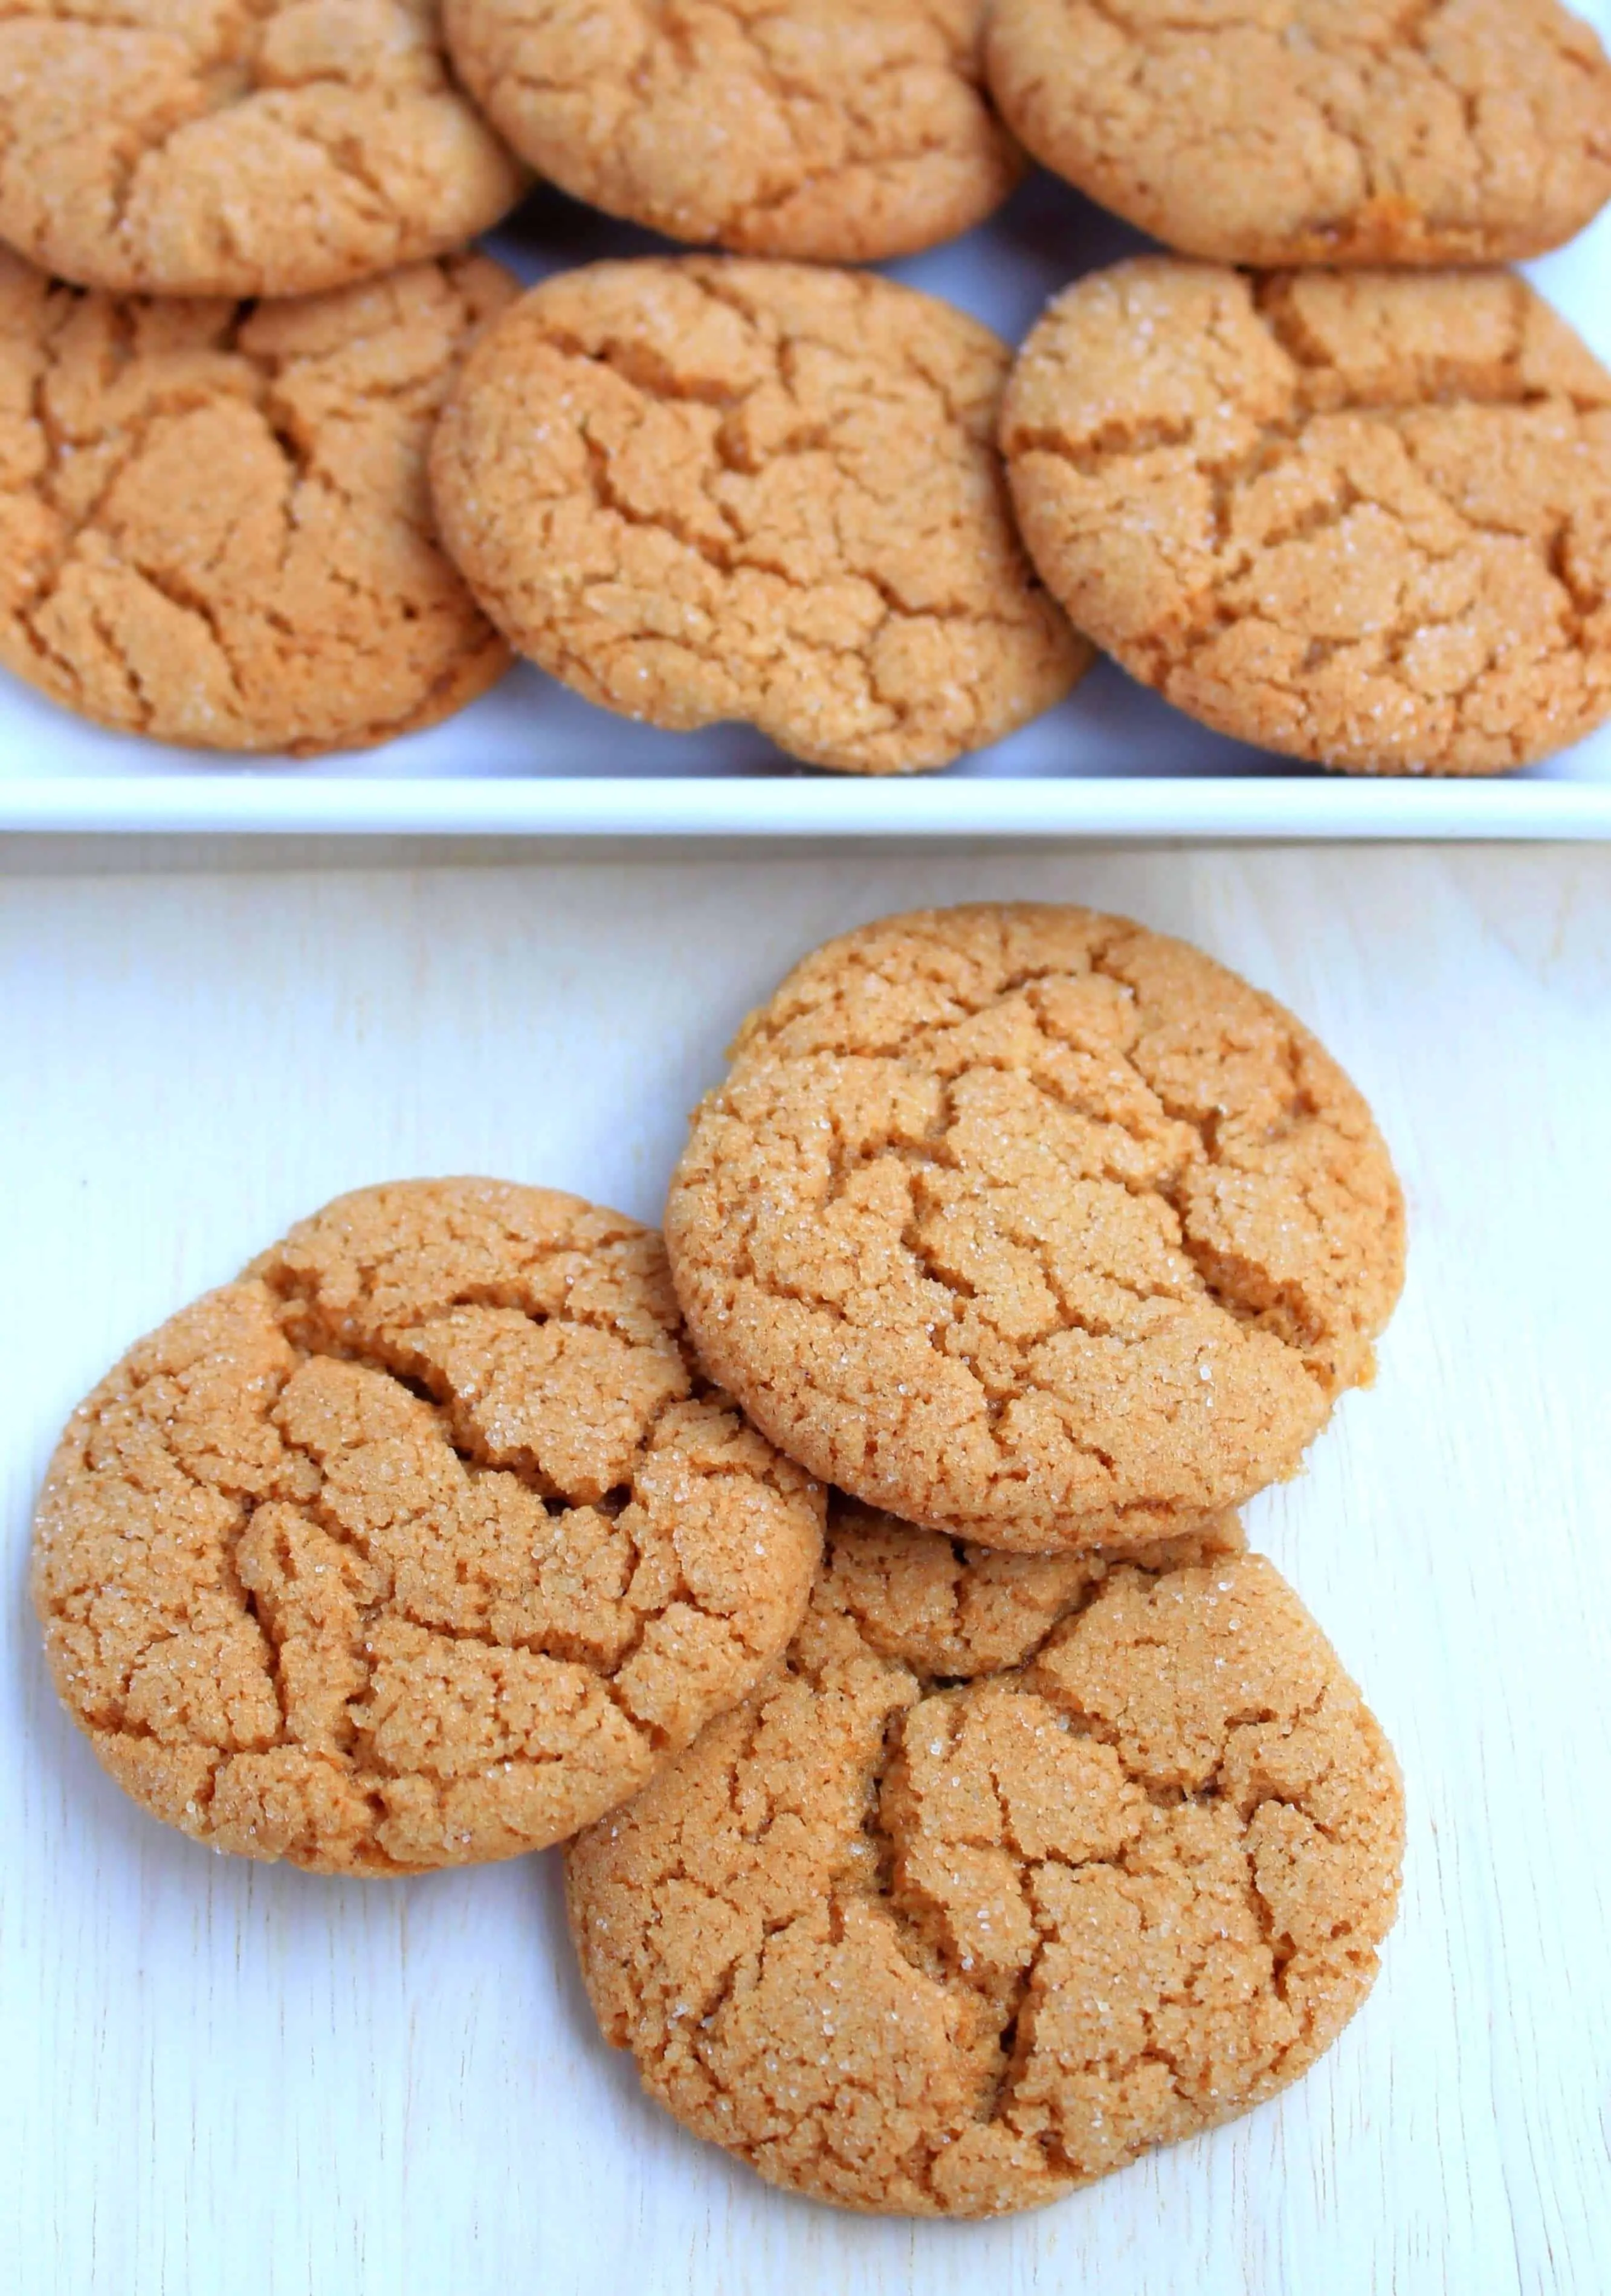 Old fashioned Ginger Cookies - Close up view of final product